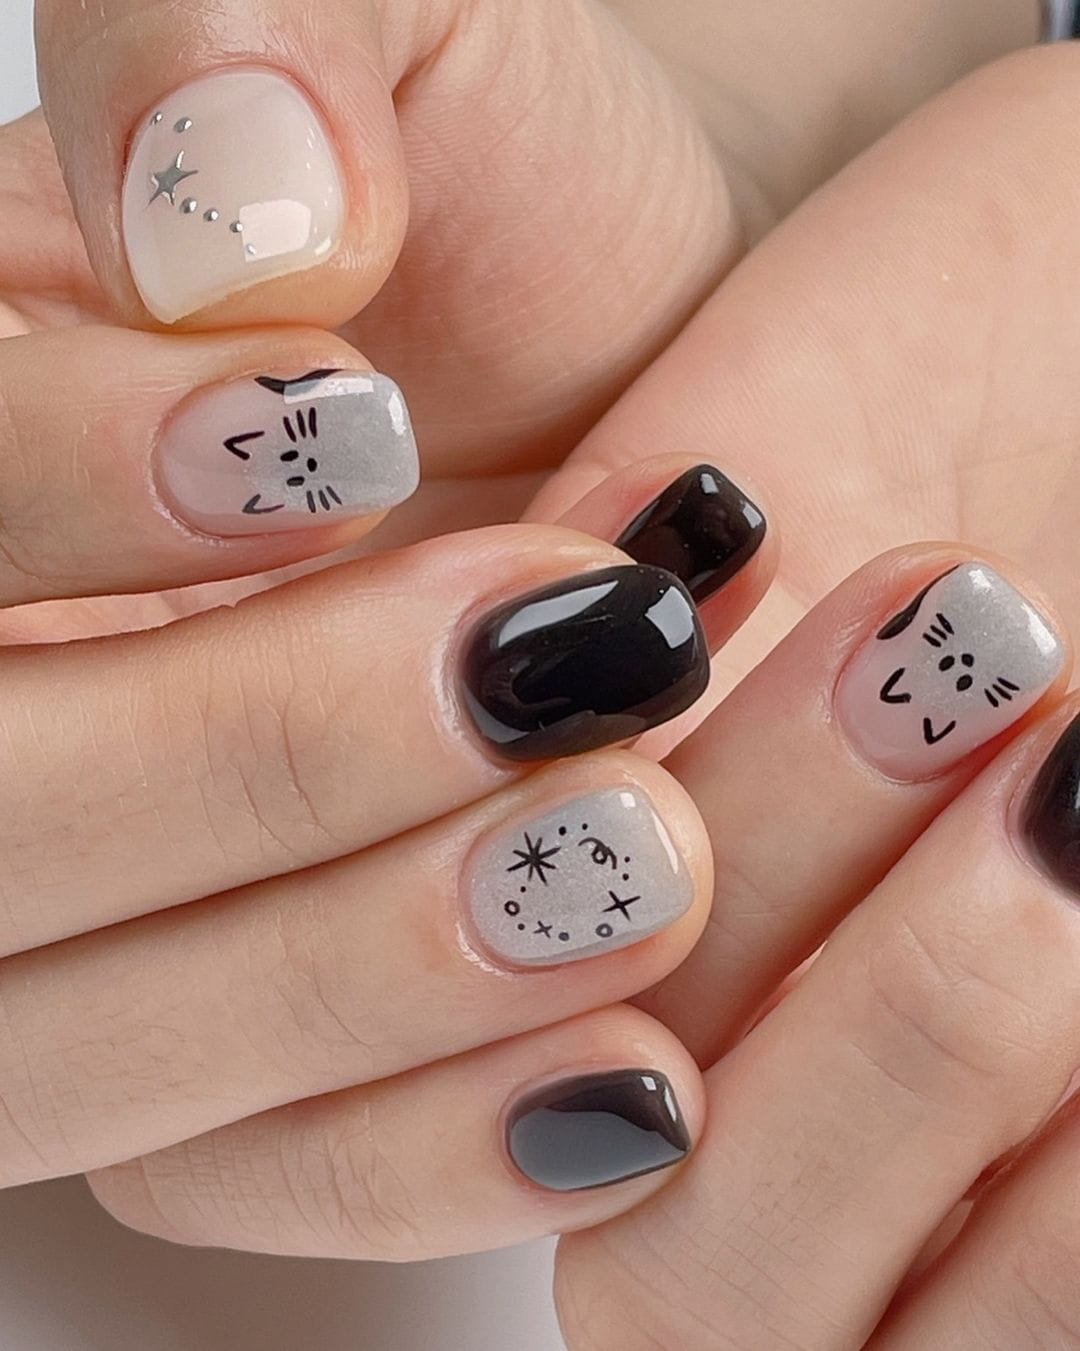 100+ Short Nail Designs You’ll Want To Try This Year images 3